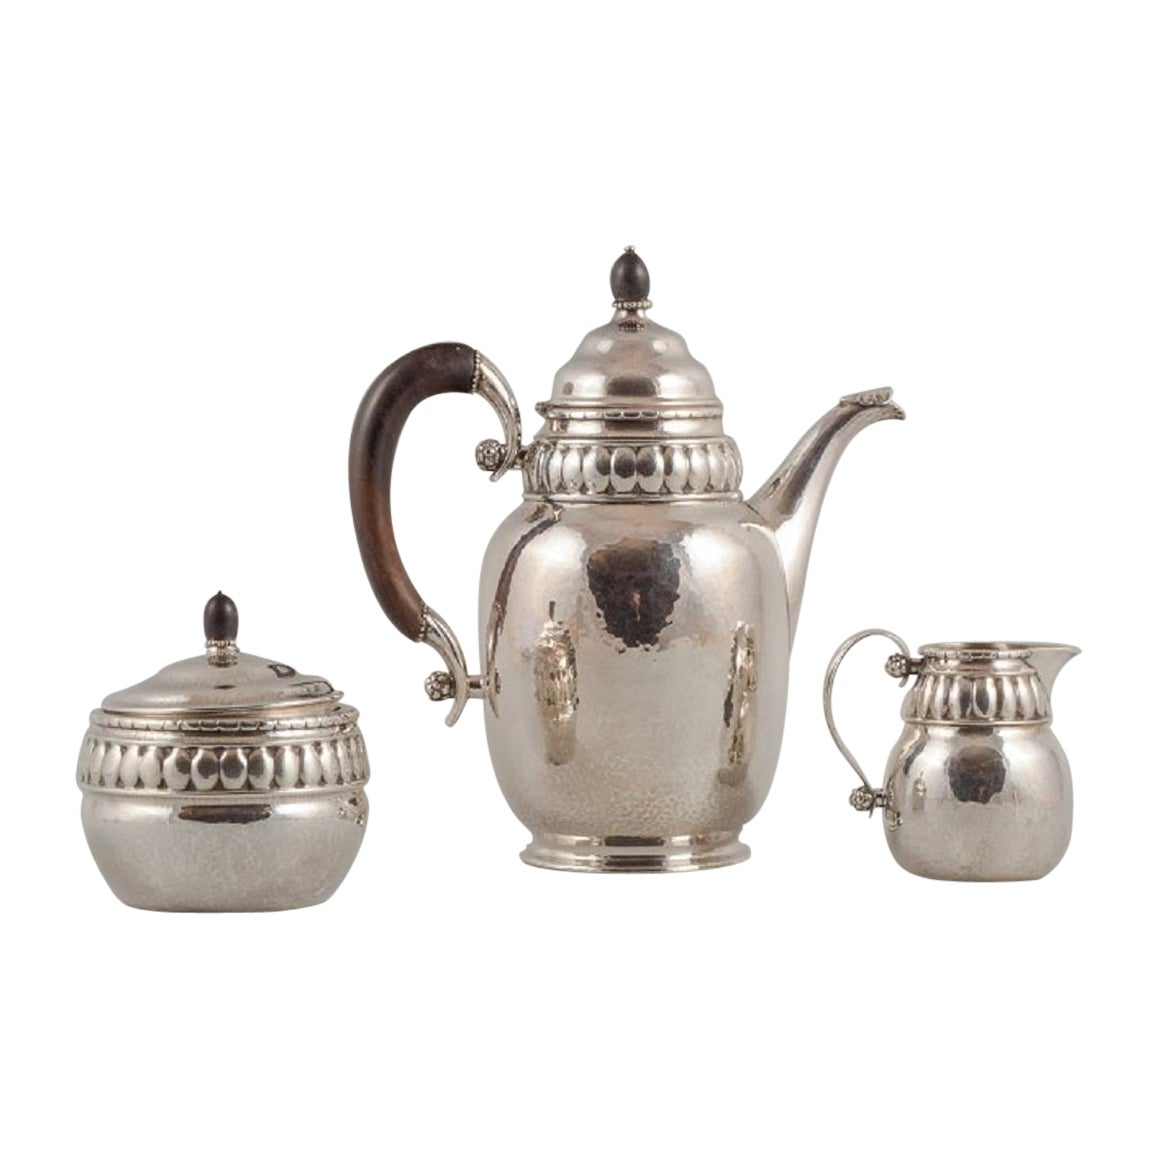 Rare Georg Jensen coffee pot with accompanying creamer and sugar bowl in silver